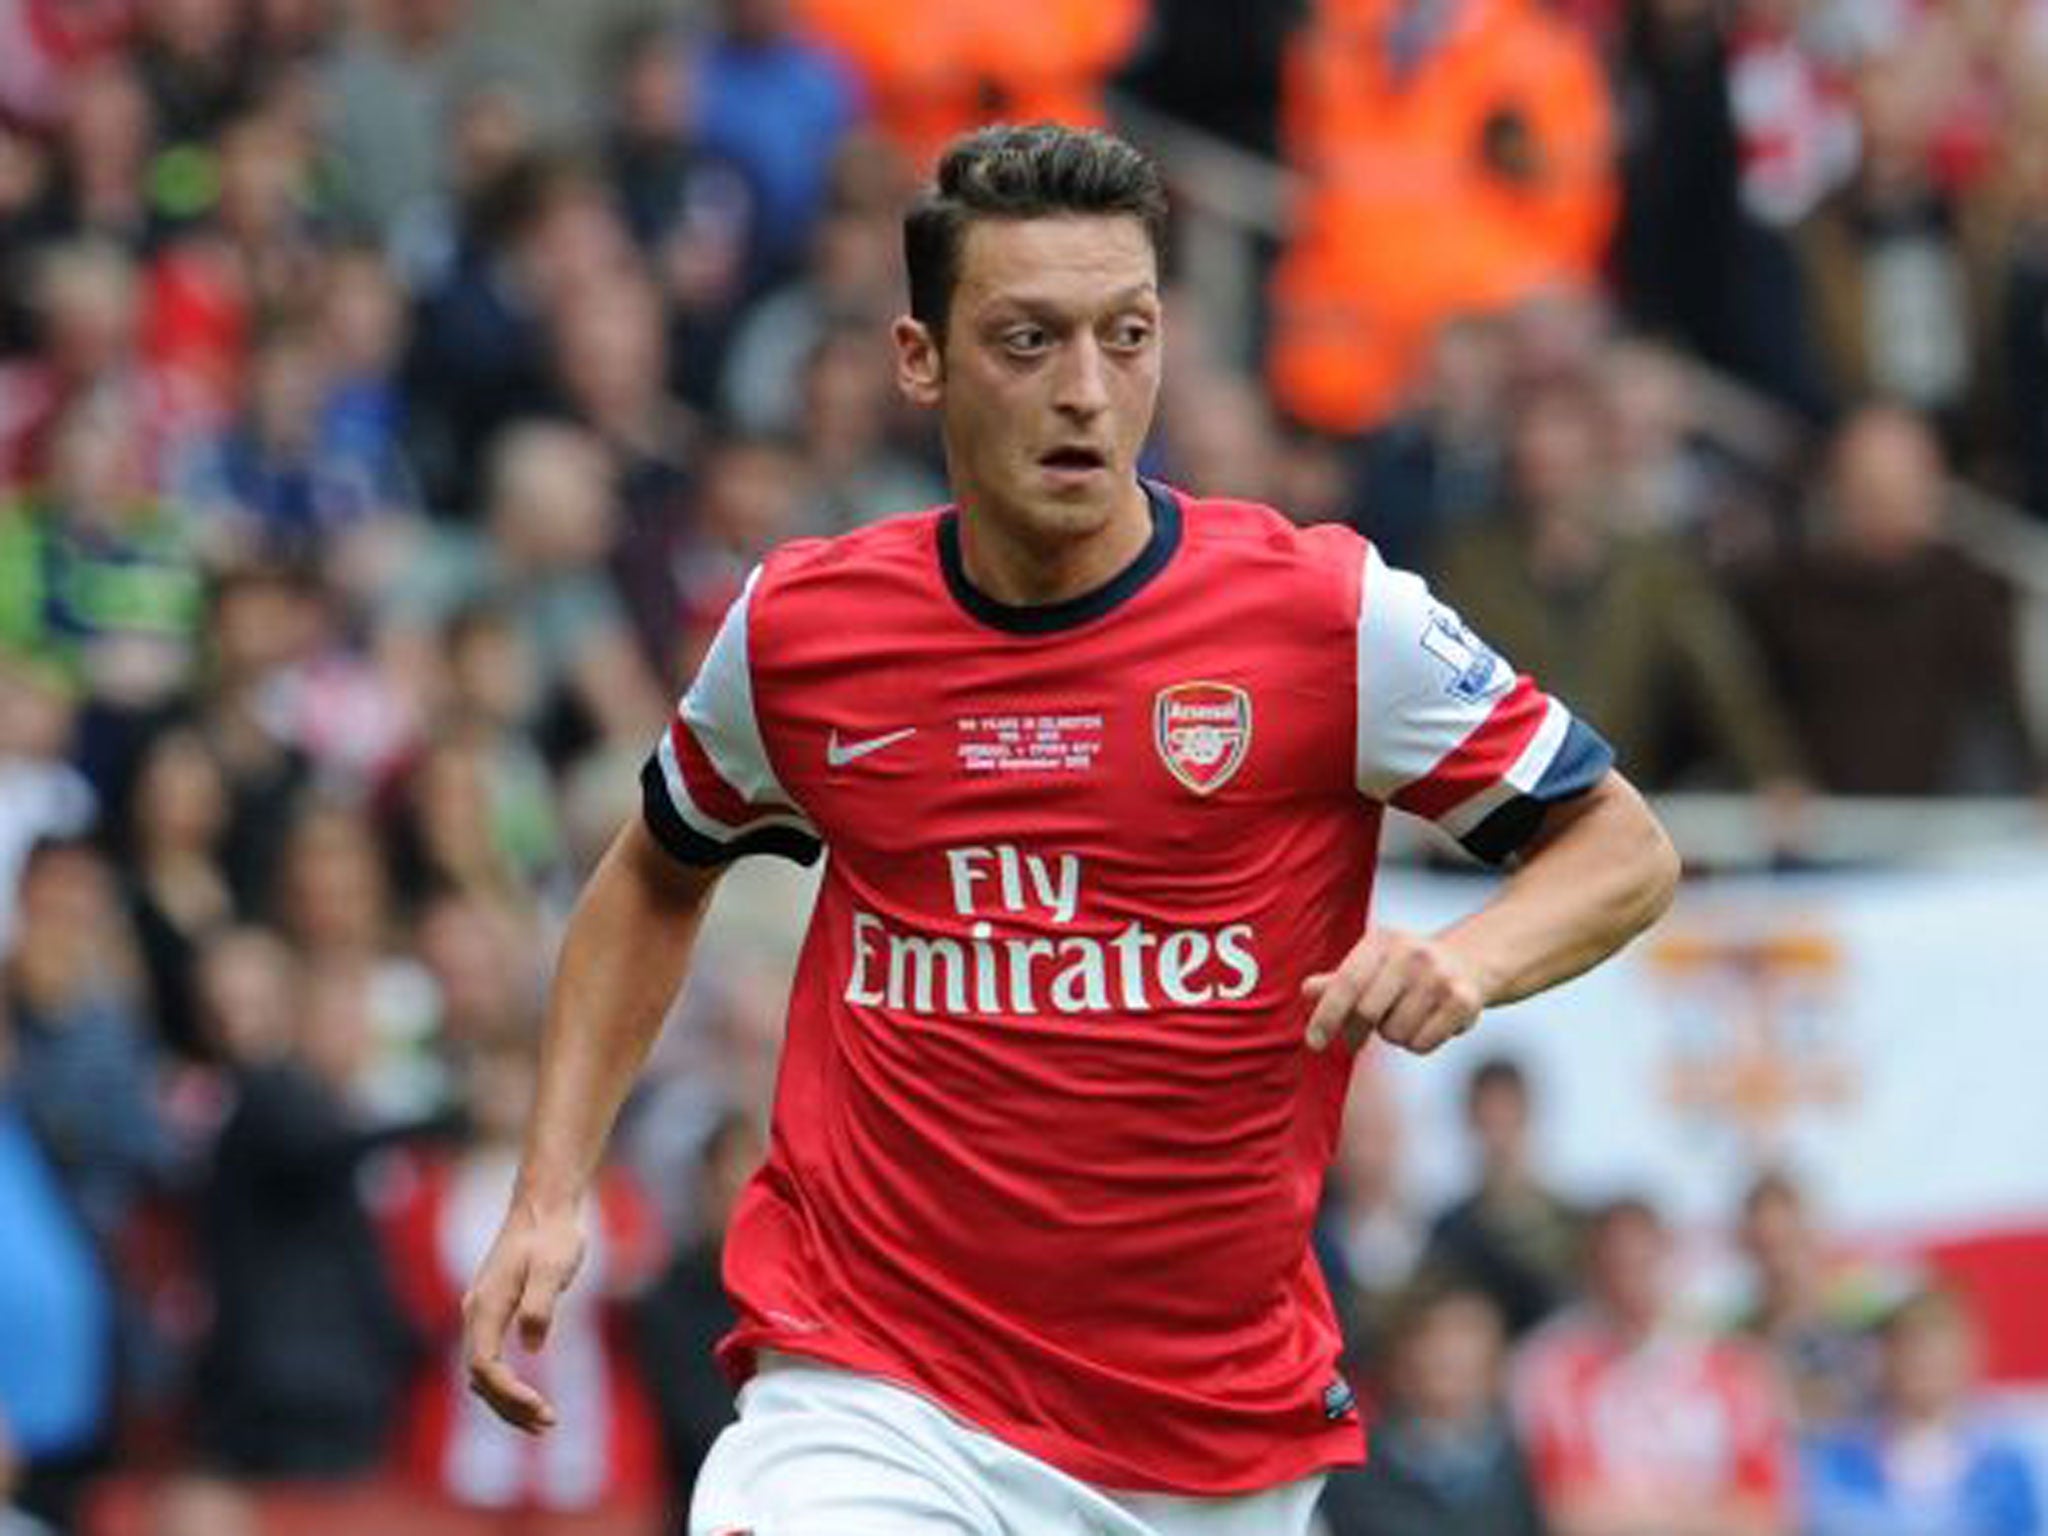 Mesut Ozil is expected to feature for Arsenal against Norwich